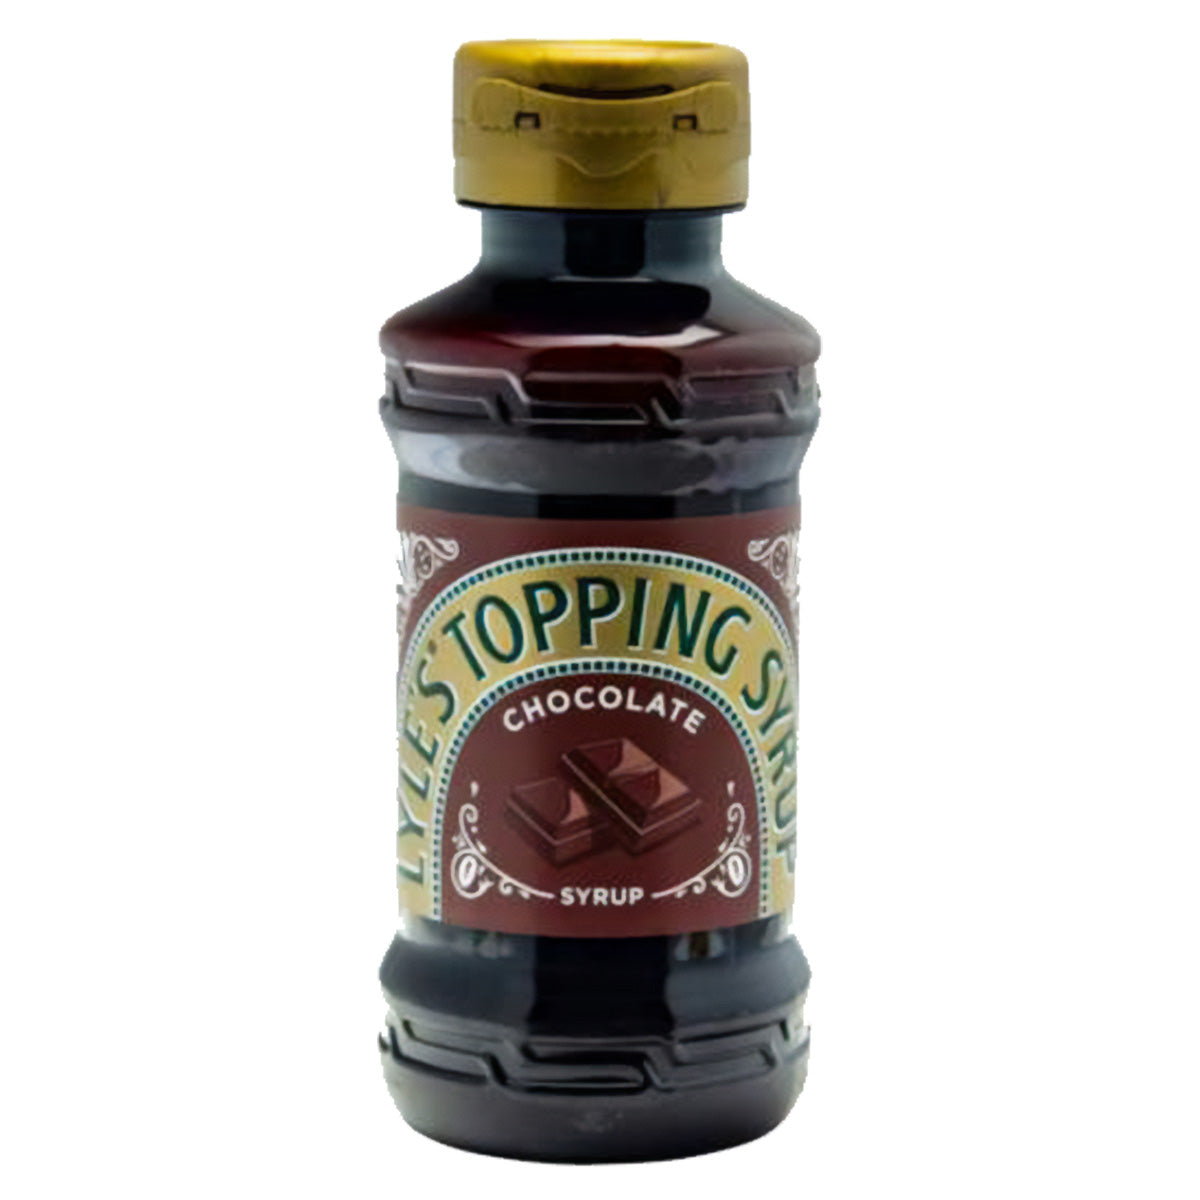 A bottle of Lyle's - Topping Syrup Chocolate - 325g on a white background.